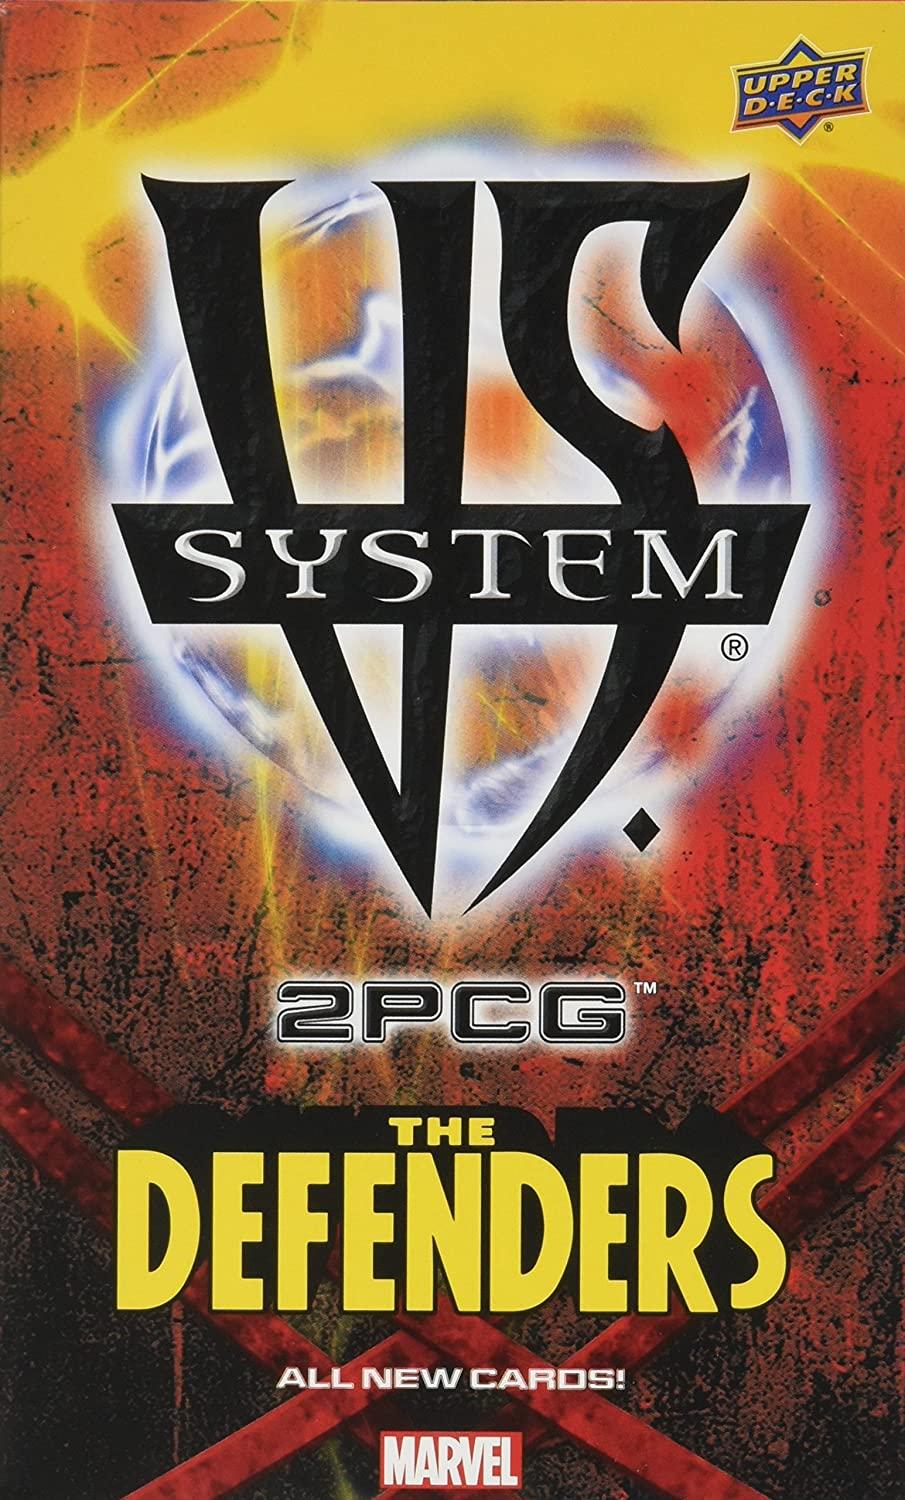 VS. system 2PCG - The Defenders